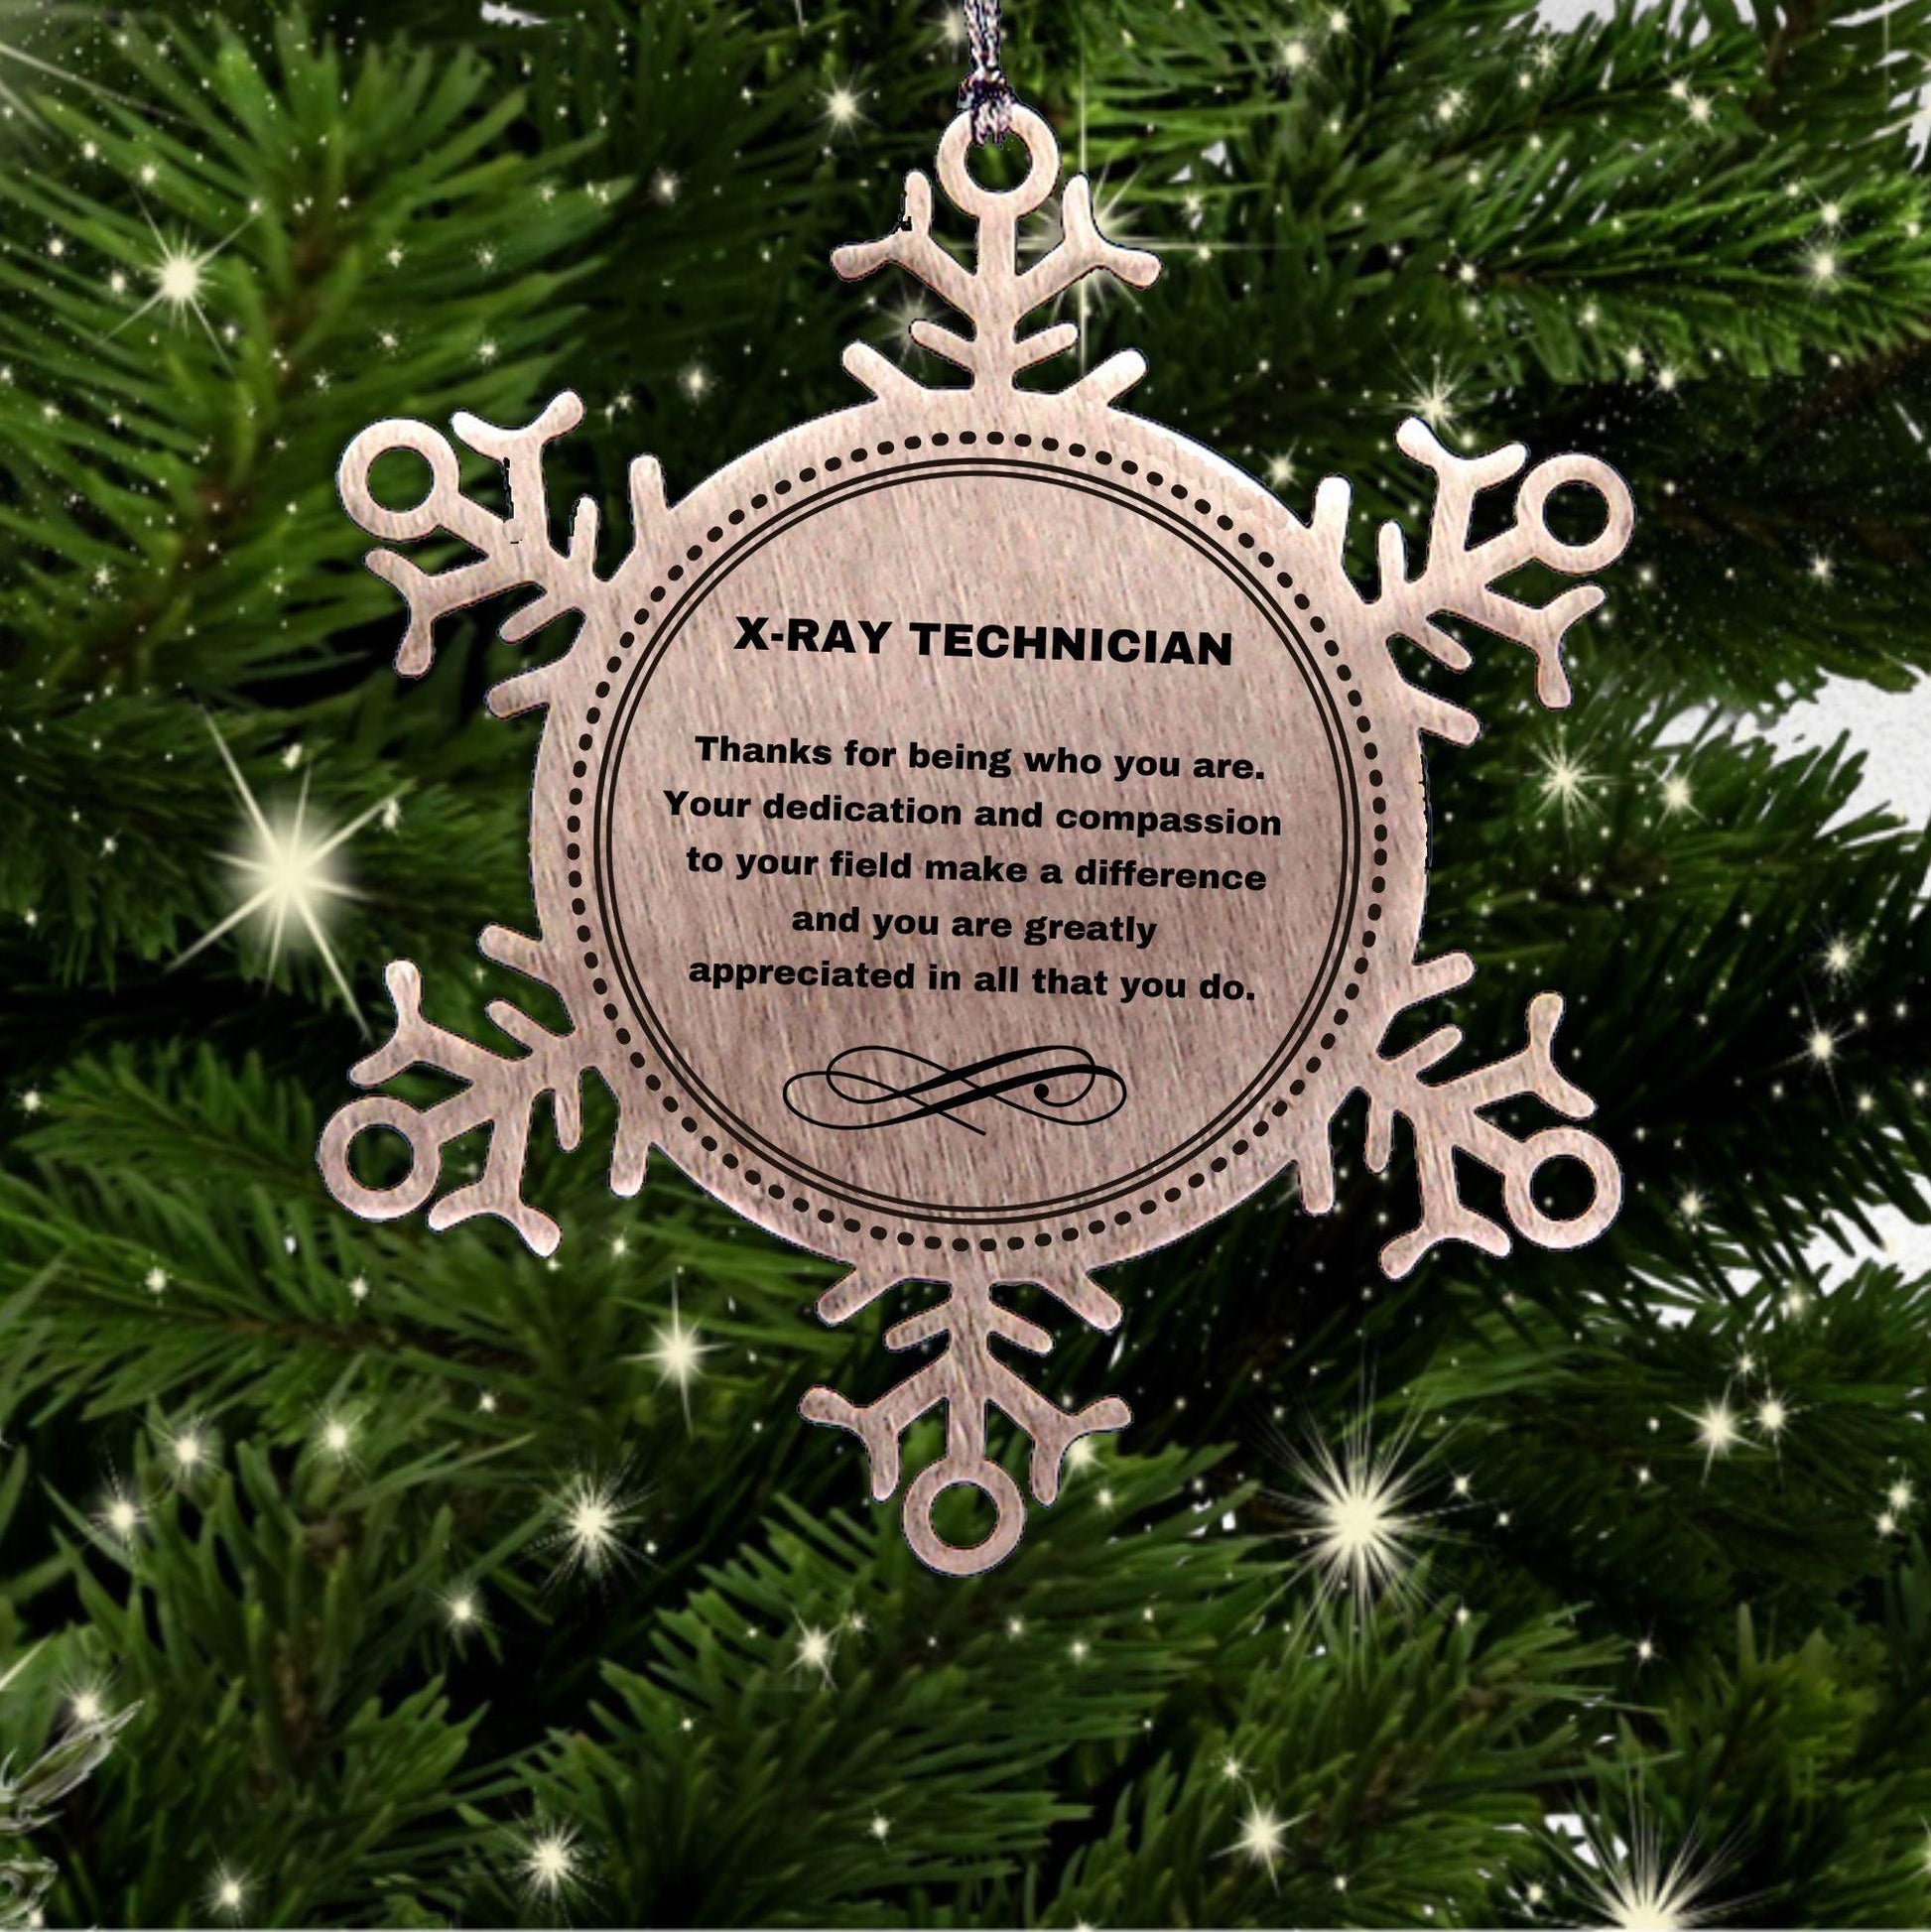 X-Ray Technician Snowflake Ornament - Thanks for being who you are - Birthday Christmas Jewelry Gifts Coworkers Colleague Boss - Mallard Moon Gift Shop